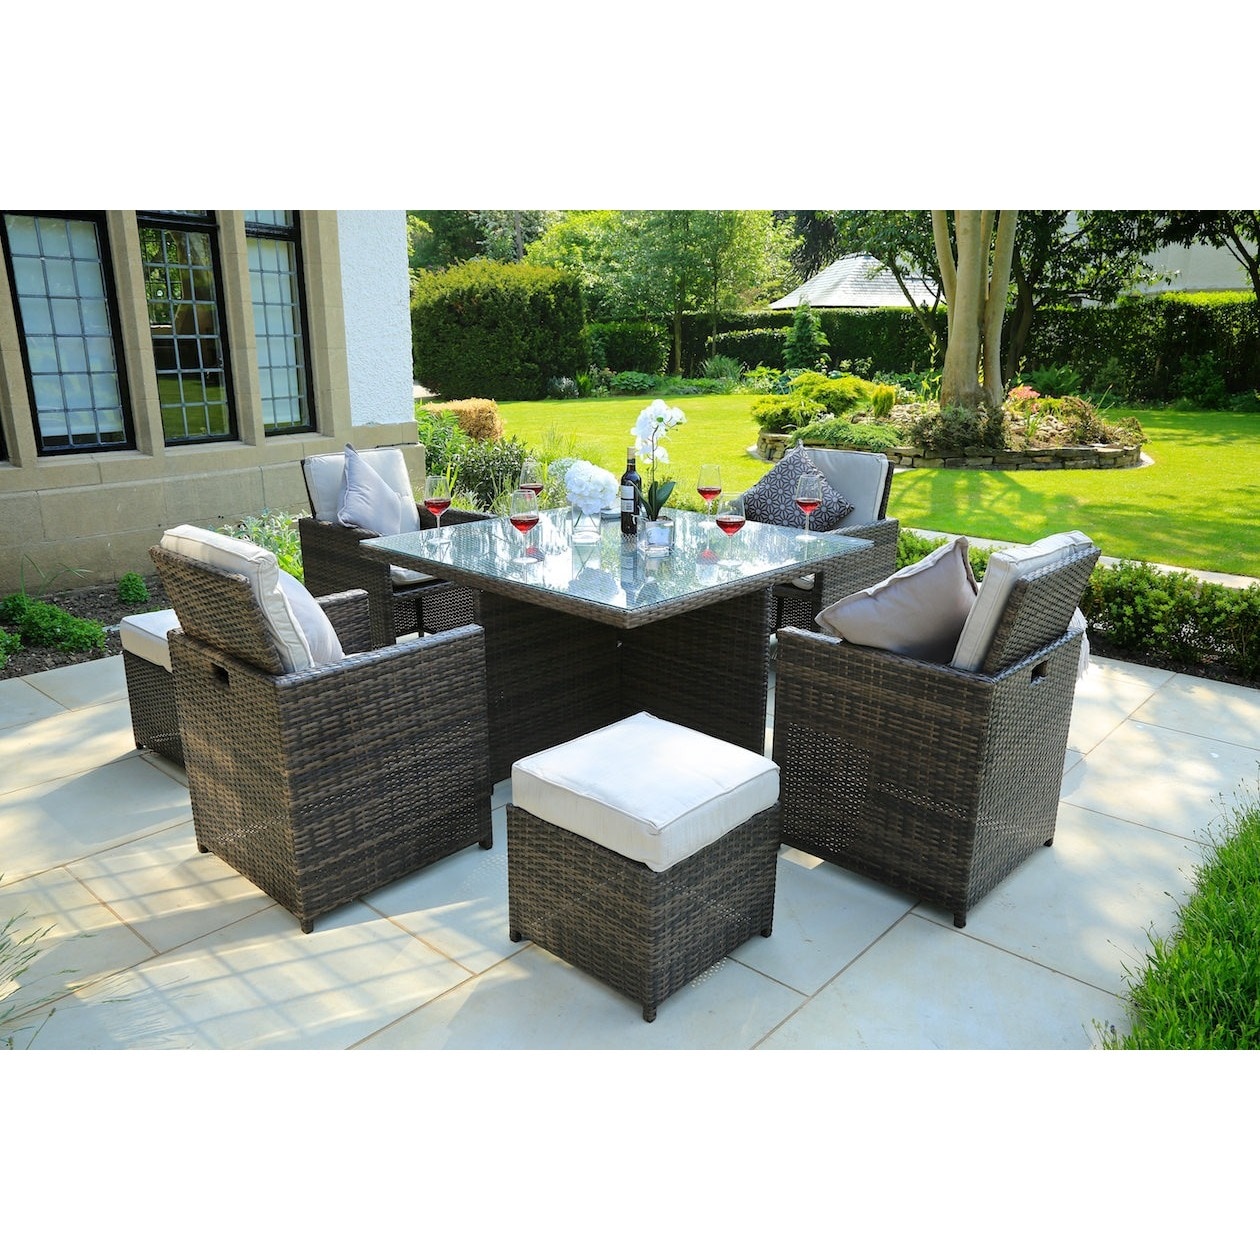 Cubo 9-piece Patio Cube Dining Set With Four Chairs And Four Footstools